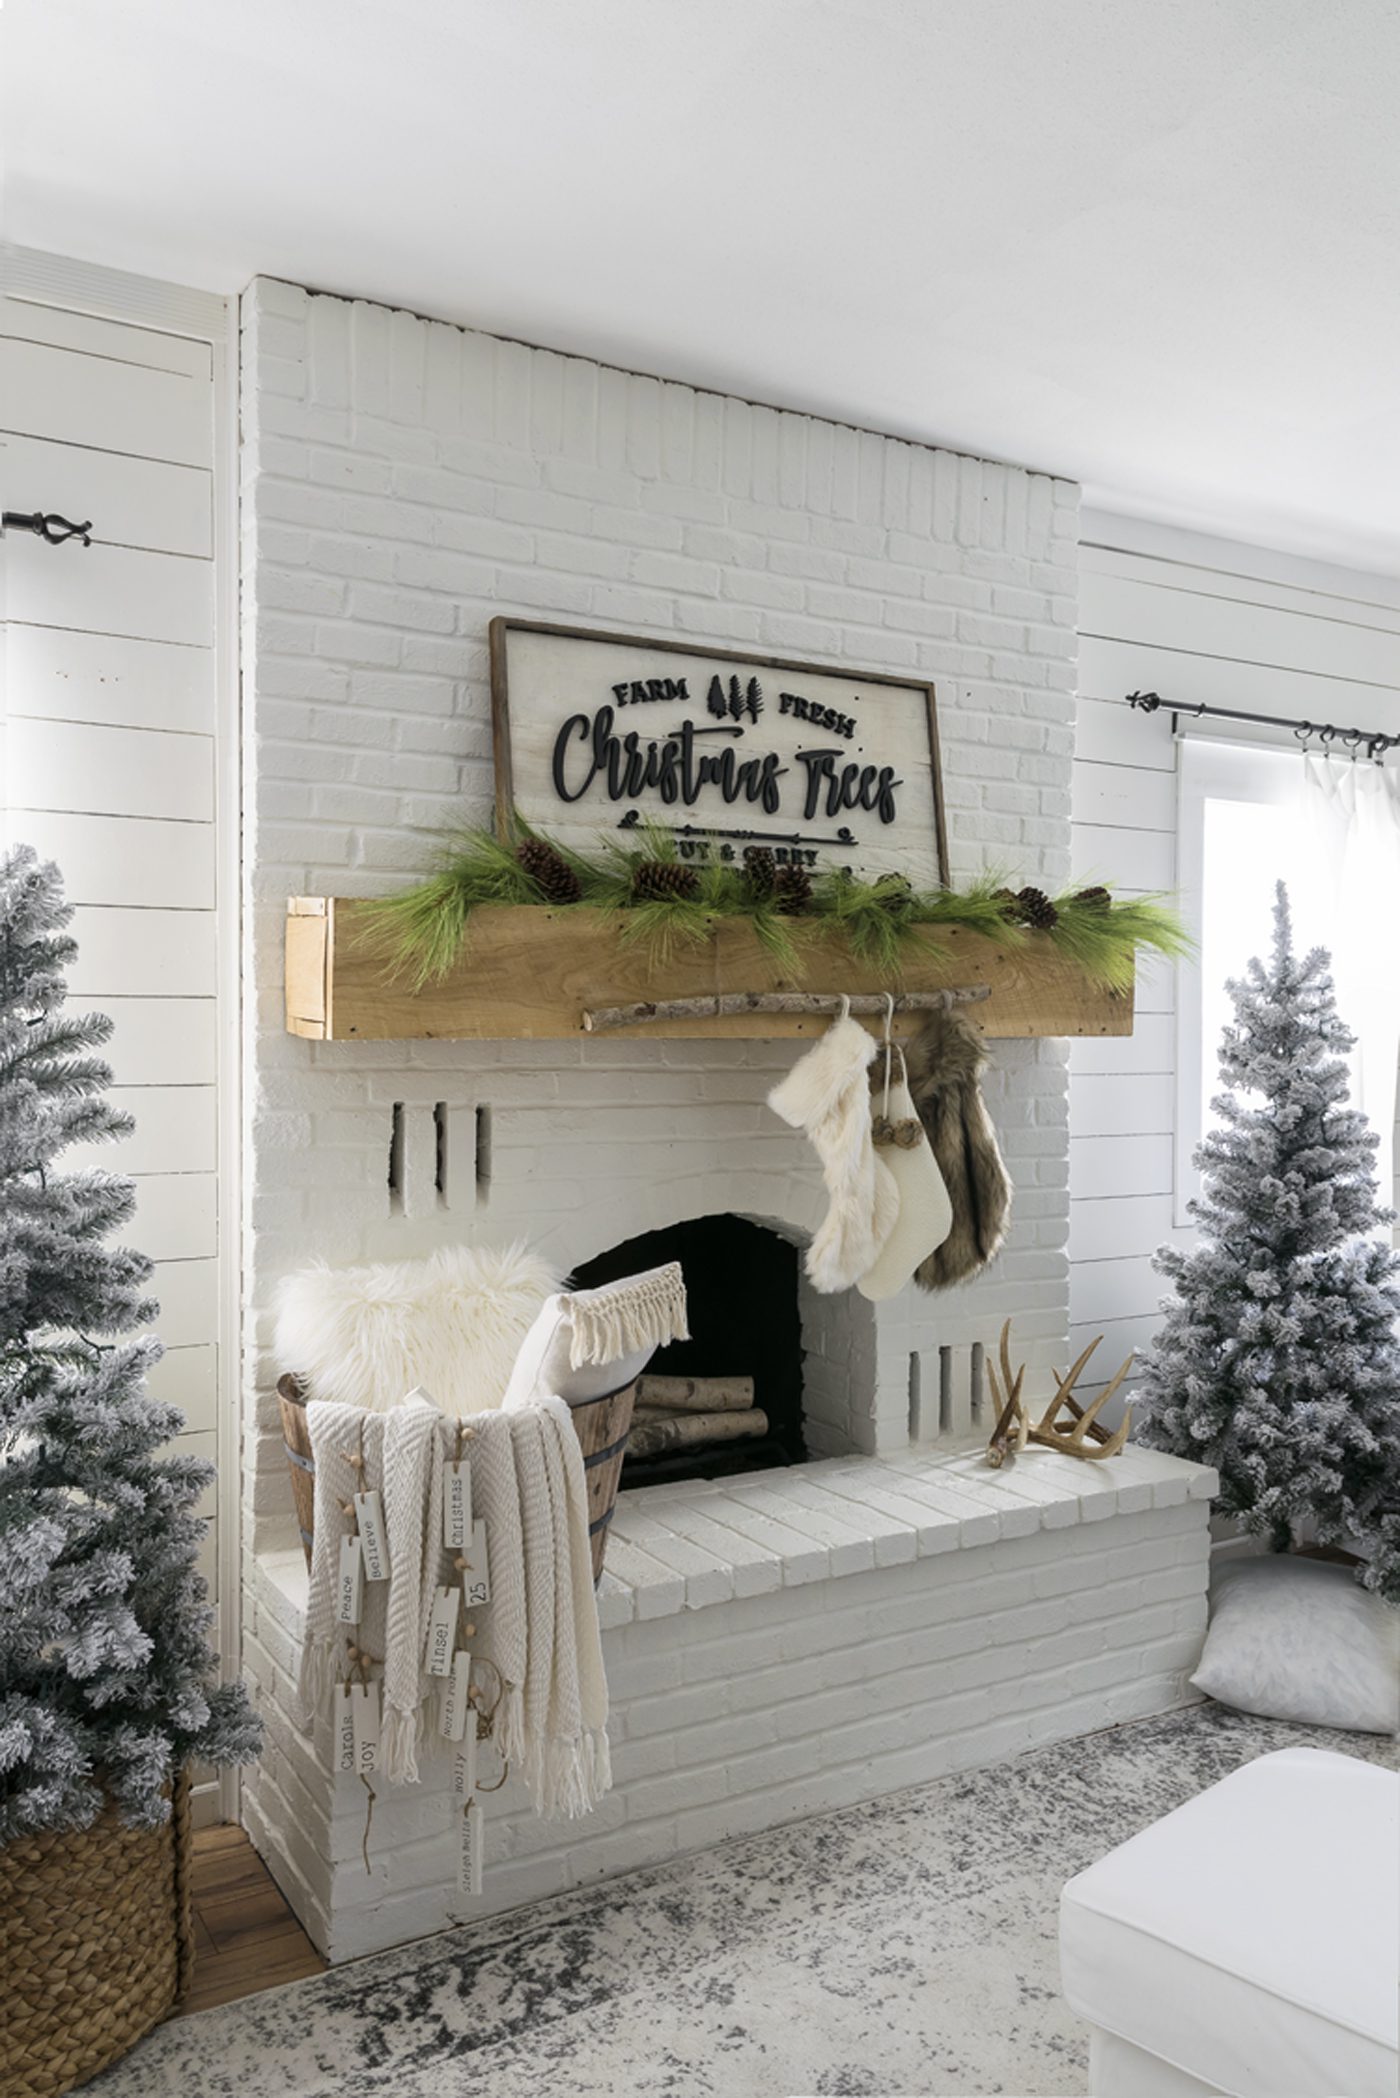 Jo's fireplace with her DIY stocking holder—a thin birch branch hanging from the mantel with faux fur stockings.